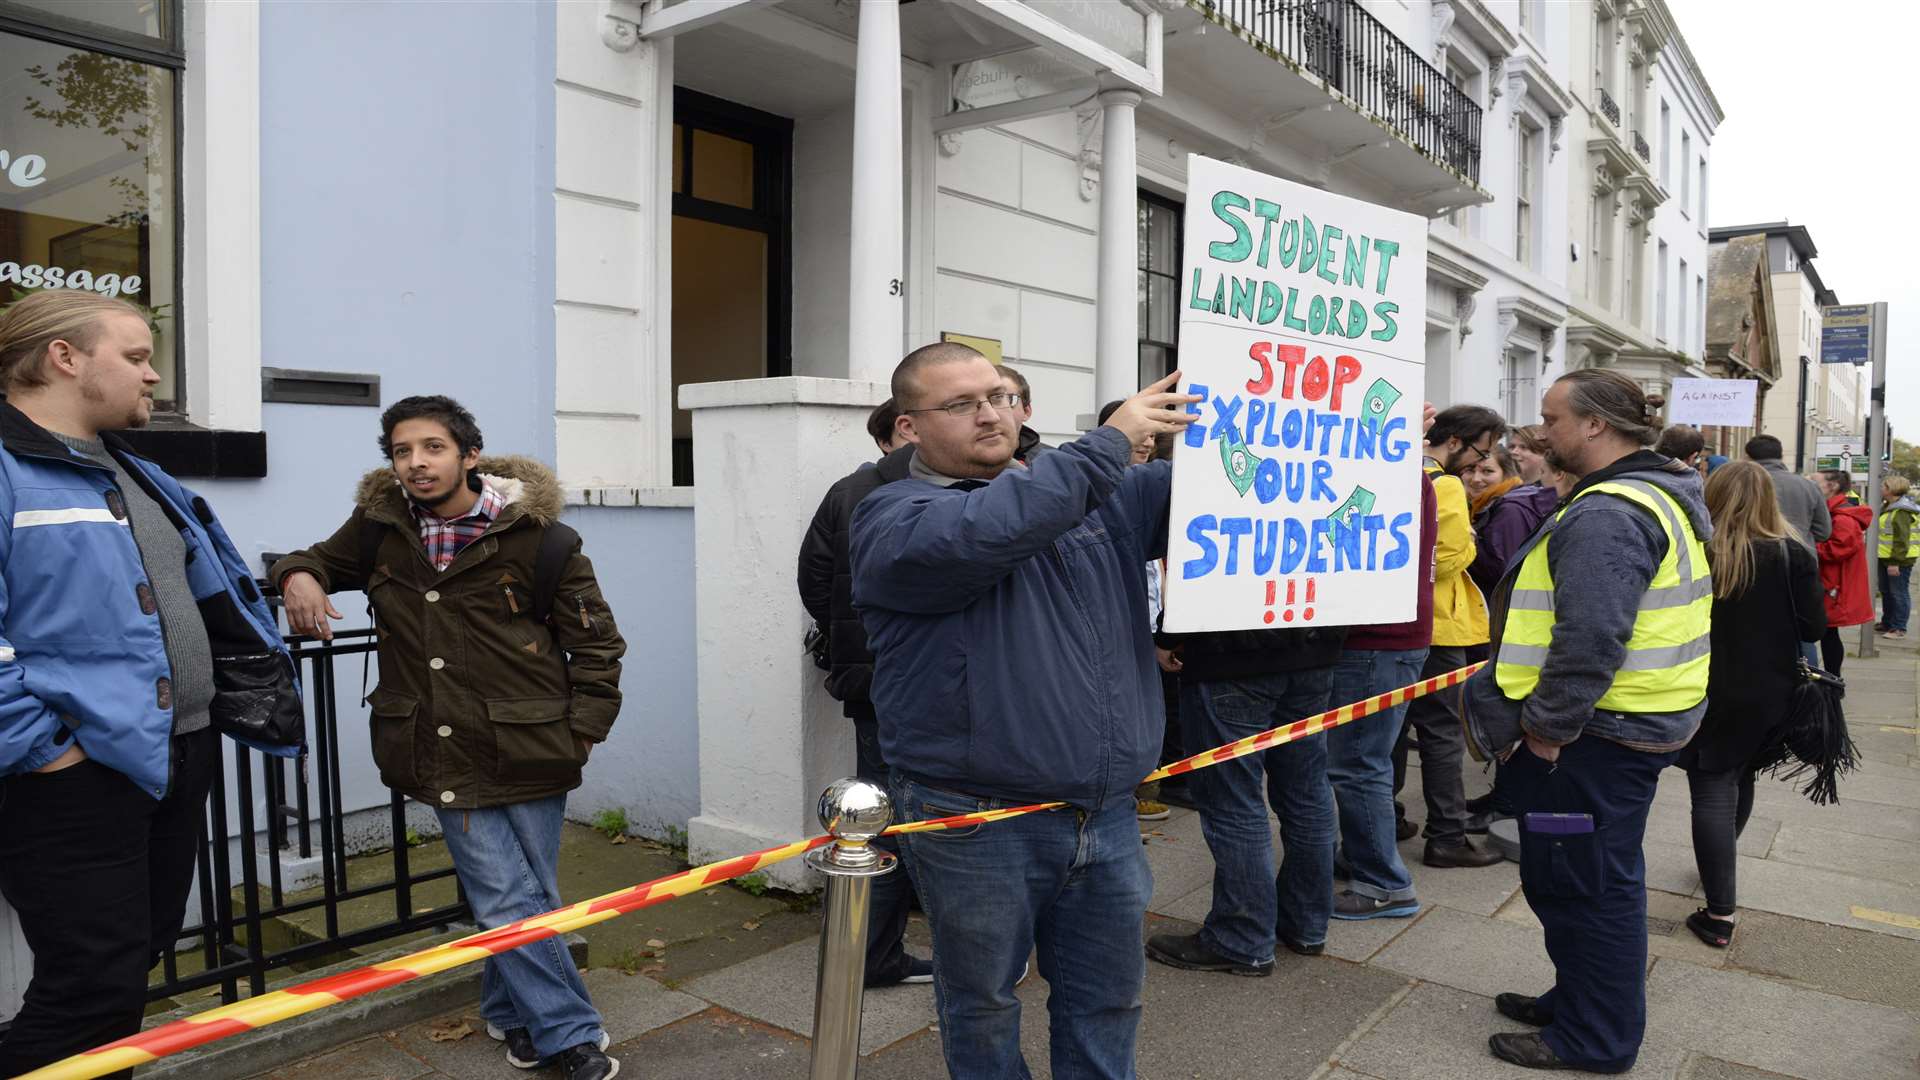 Students protesting outside the Student Letting Agency